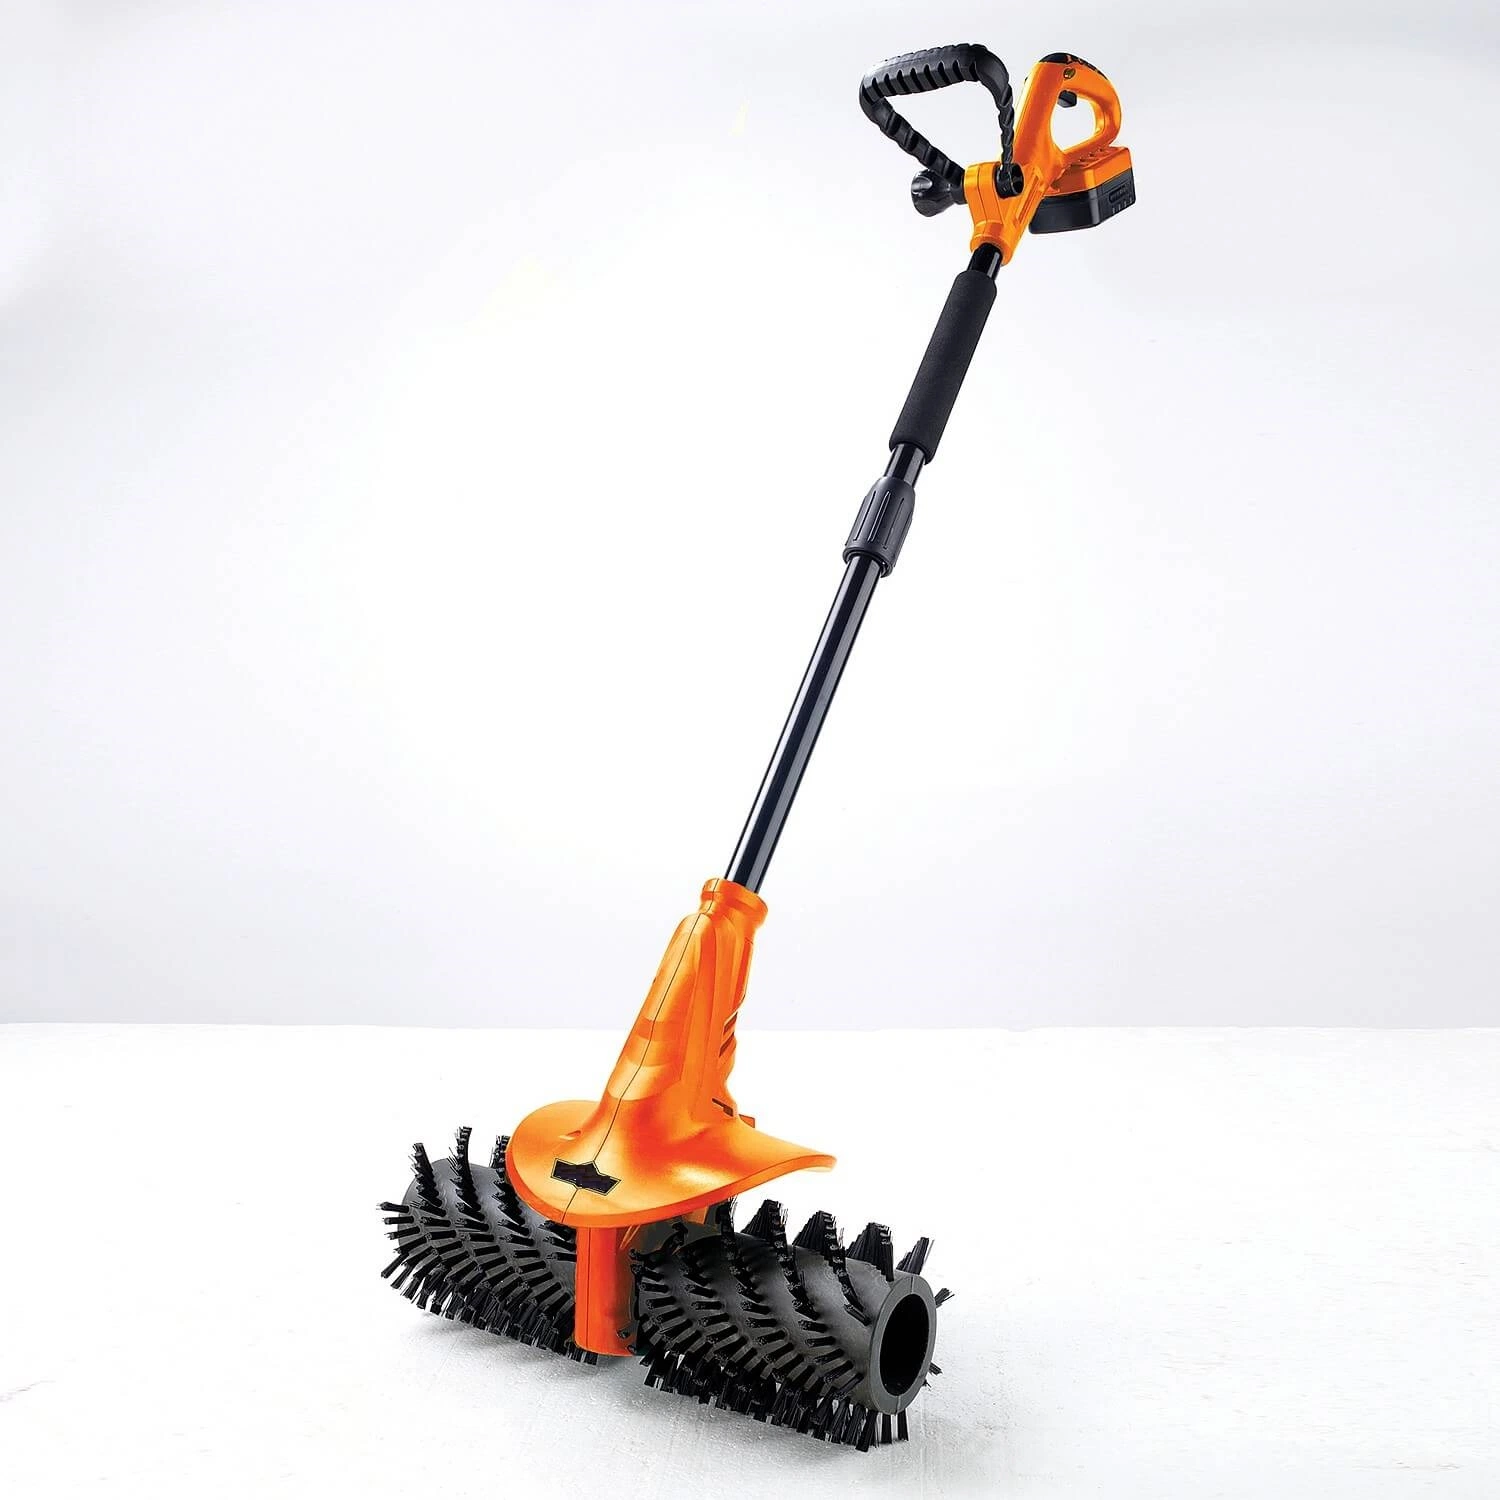 Nueva tecnología Powerful-Green-DC20V Max-Li-ion Battery-Cordless/Electric-Garden Power-Tool Machines-Artificial/césped Grass-Cleaning Power-Sweeper/Cepillo